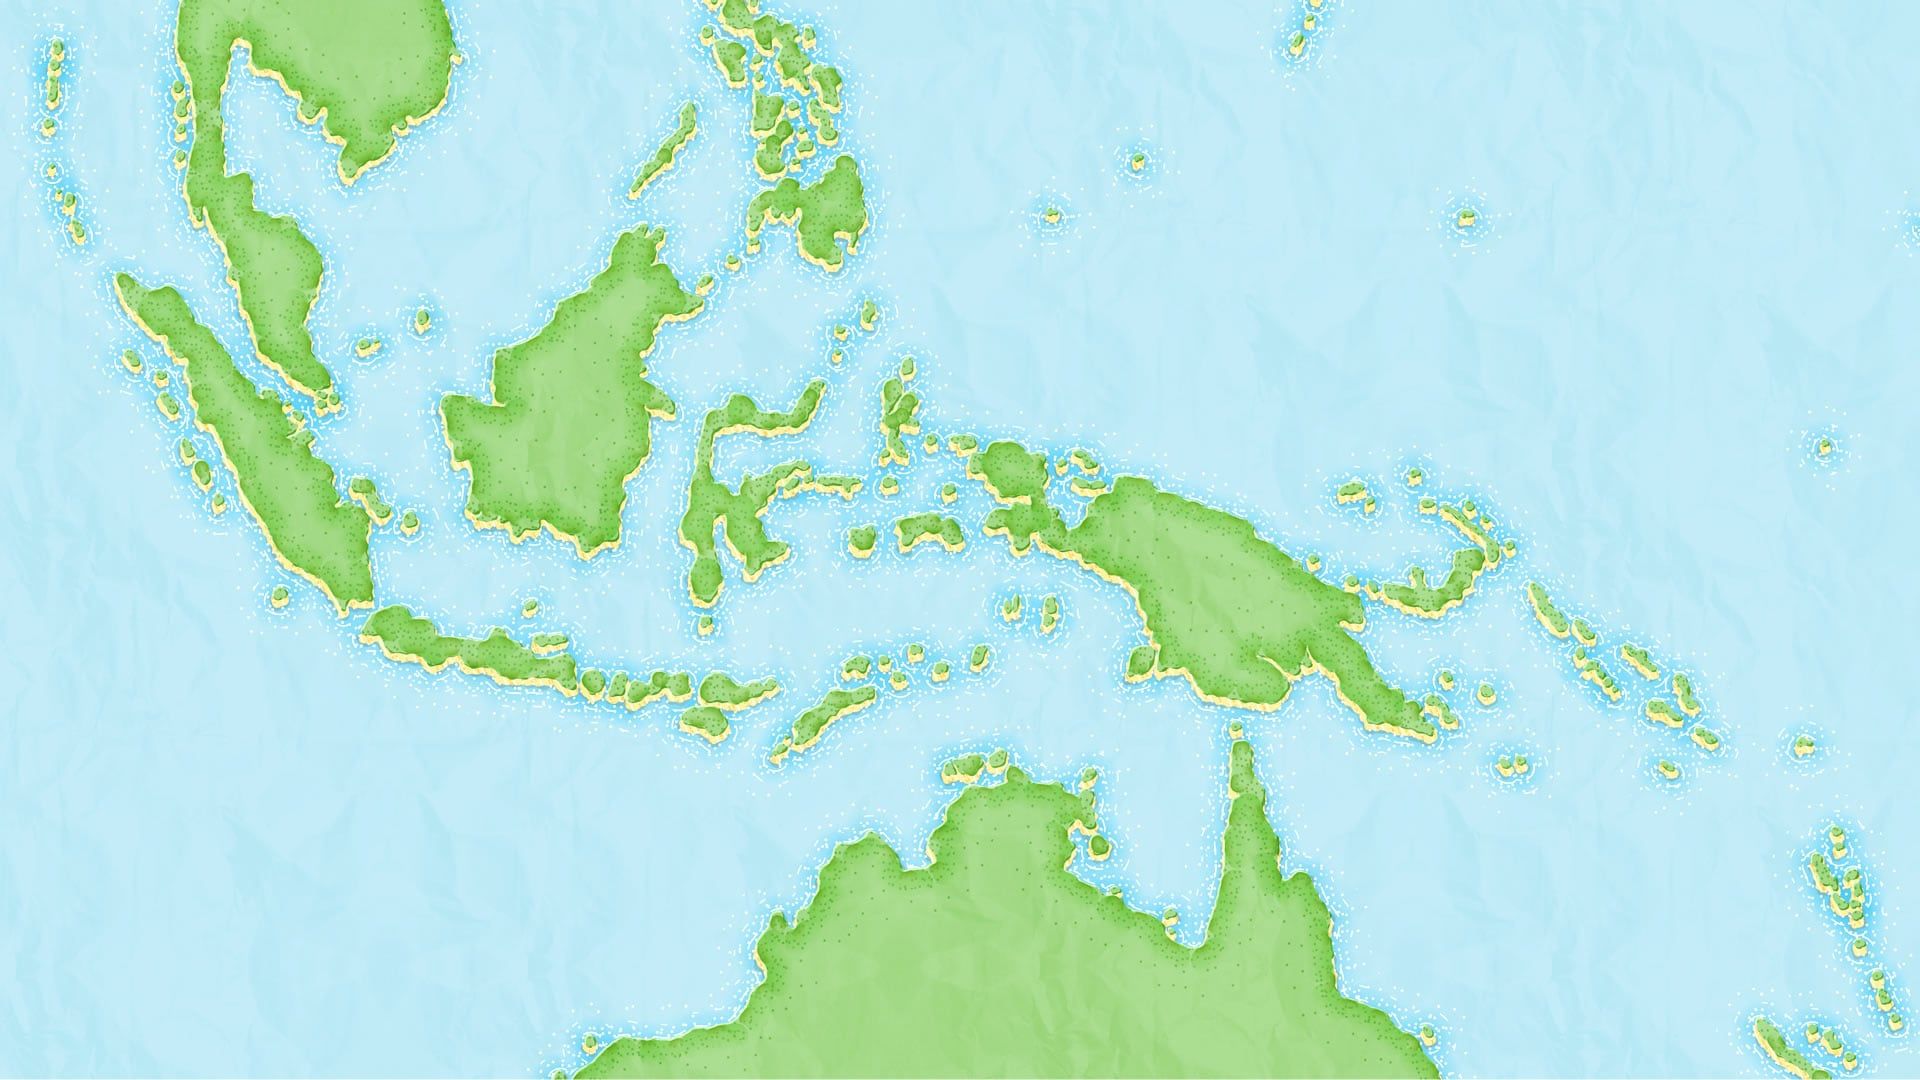 illustration-style cartography in ArcGIs Pro